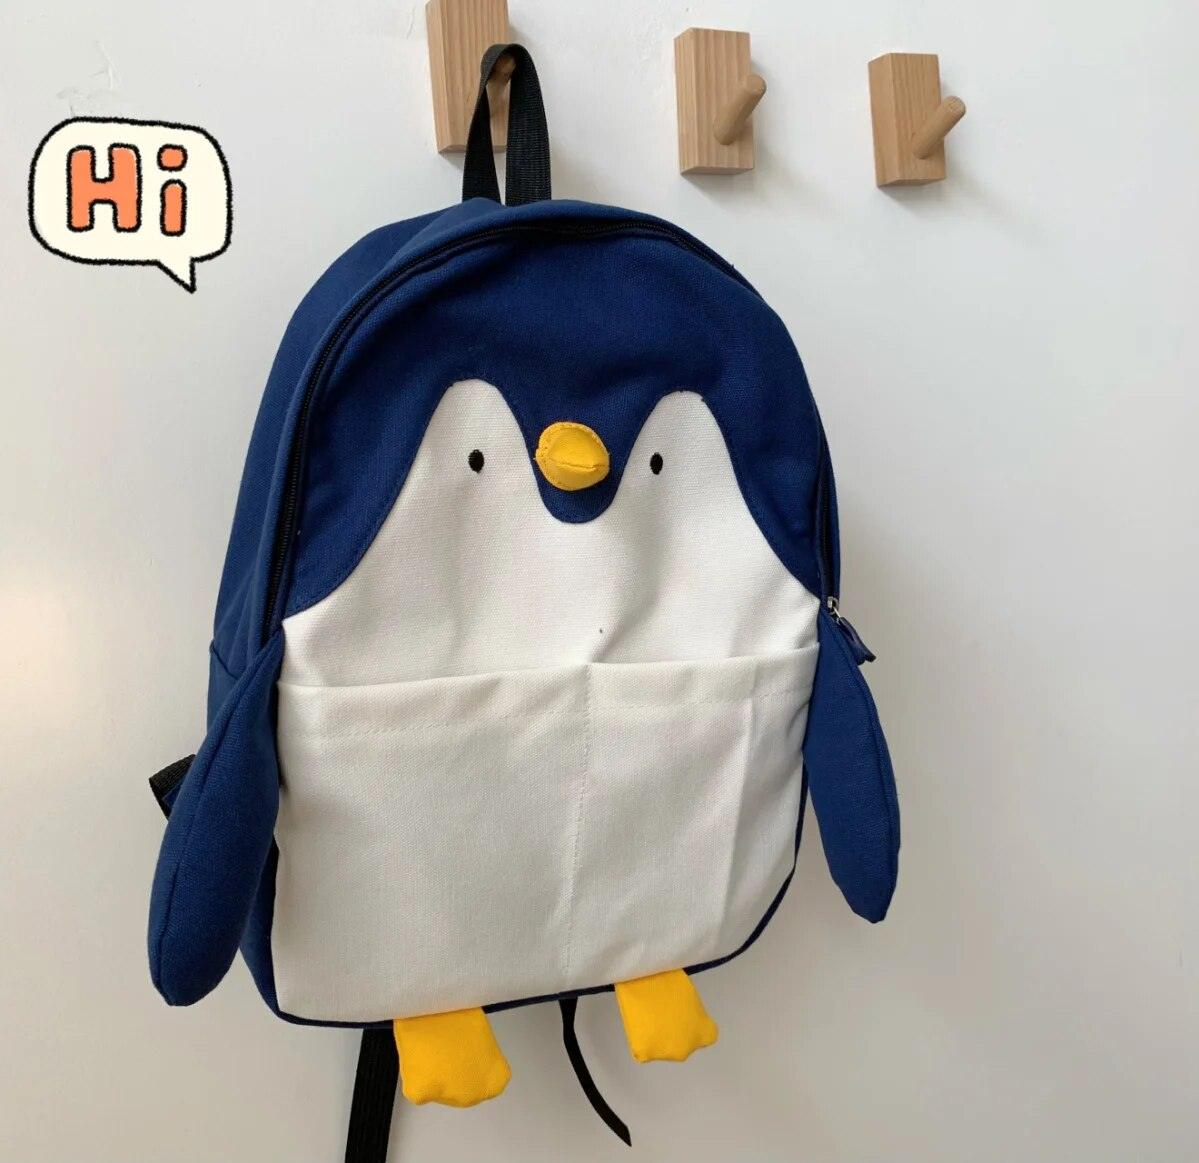 A standout Silly Sausage penguin Animal Backpacks, the perfect gift for any backpacks enthusiast, hanging on a wall.